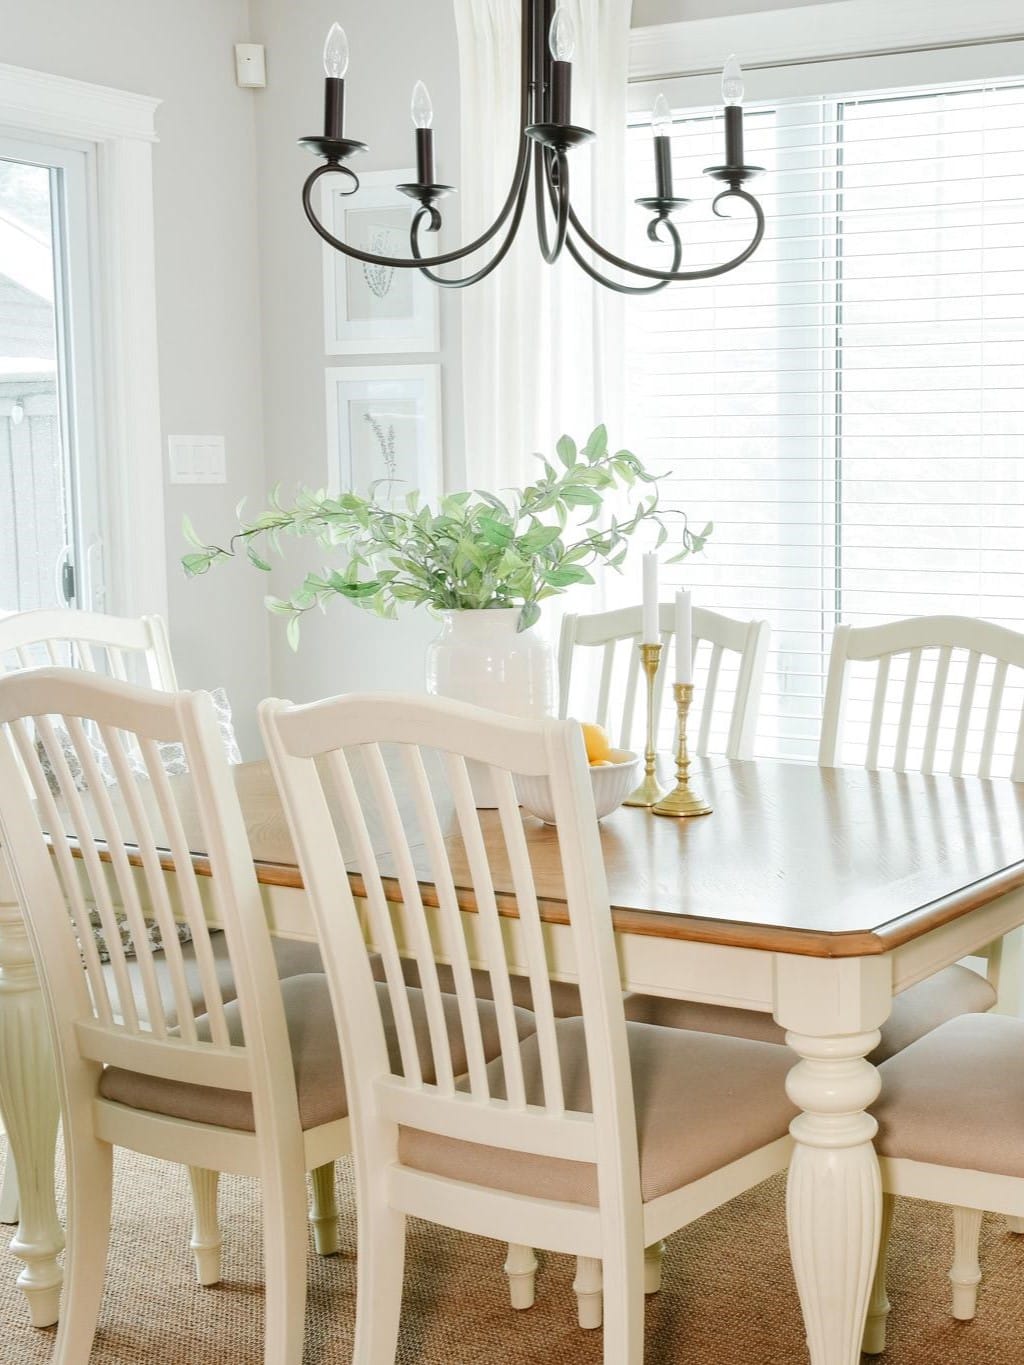 Tips & Tricks for Decorating a Small Dining Room